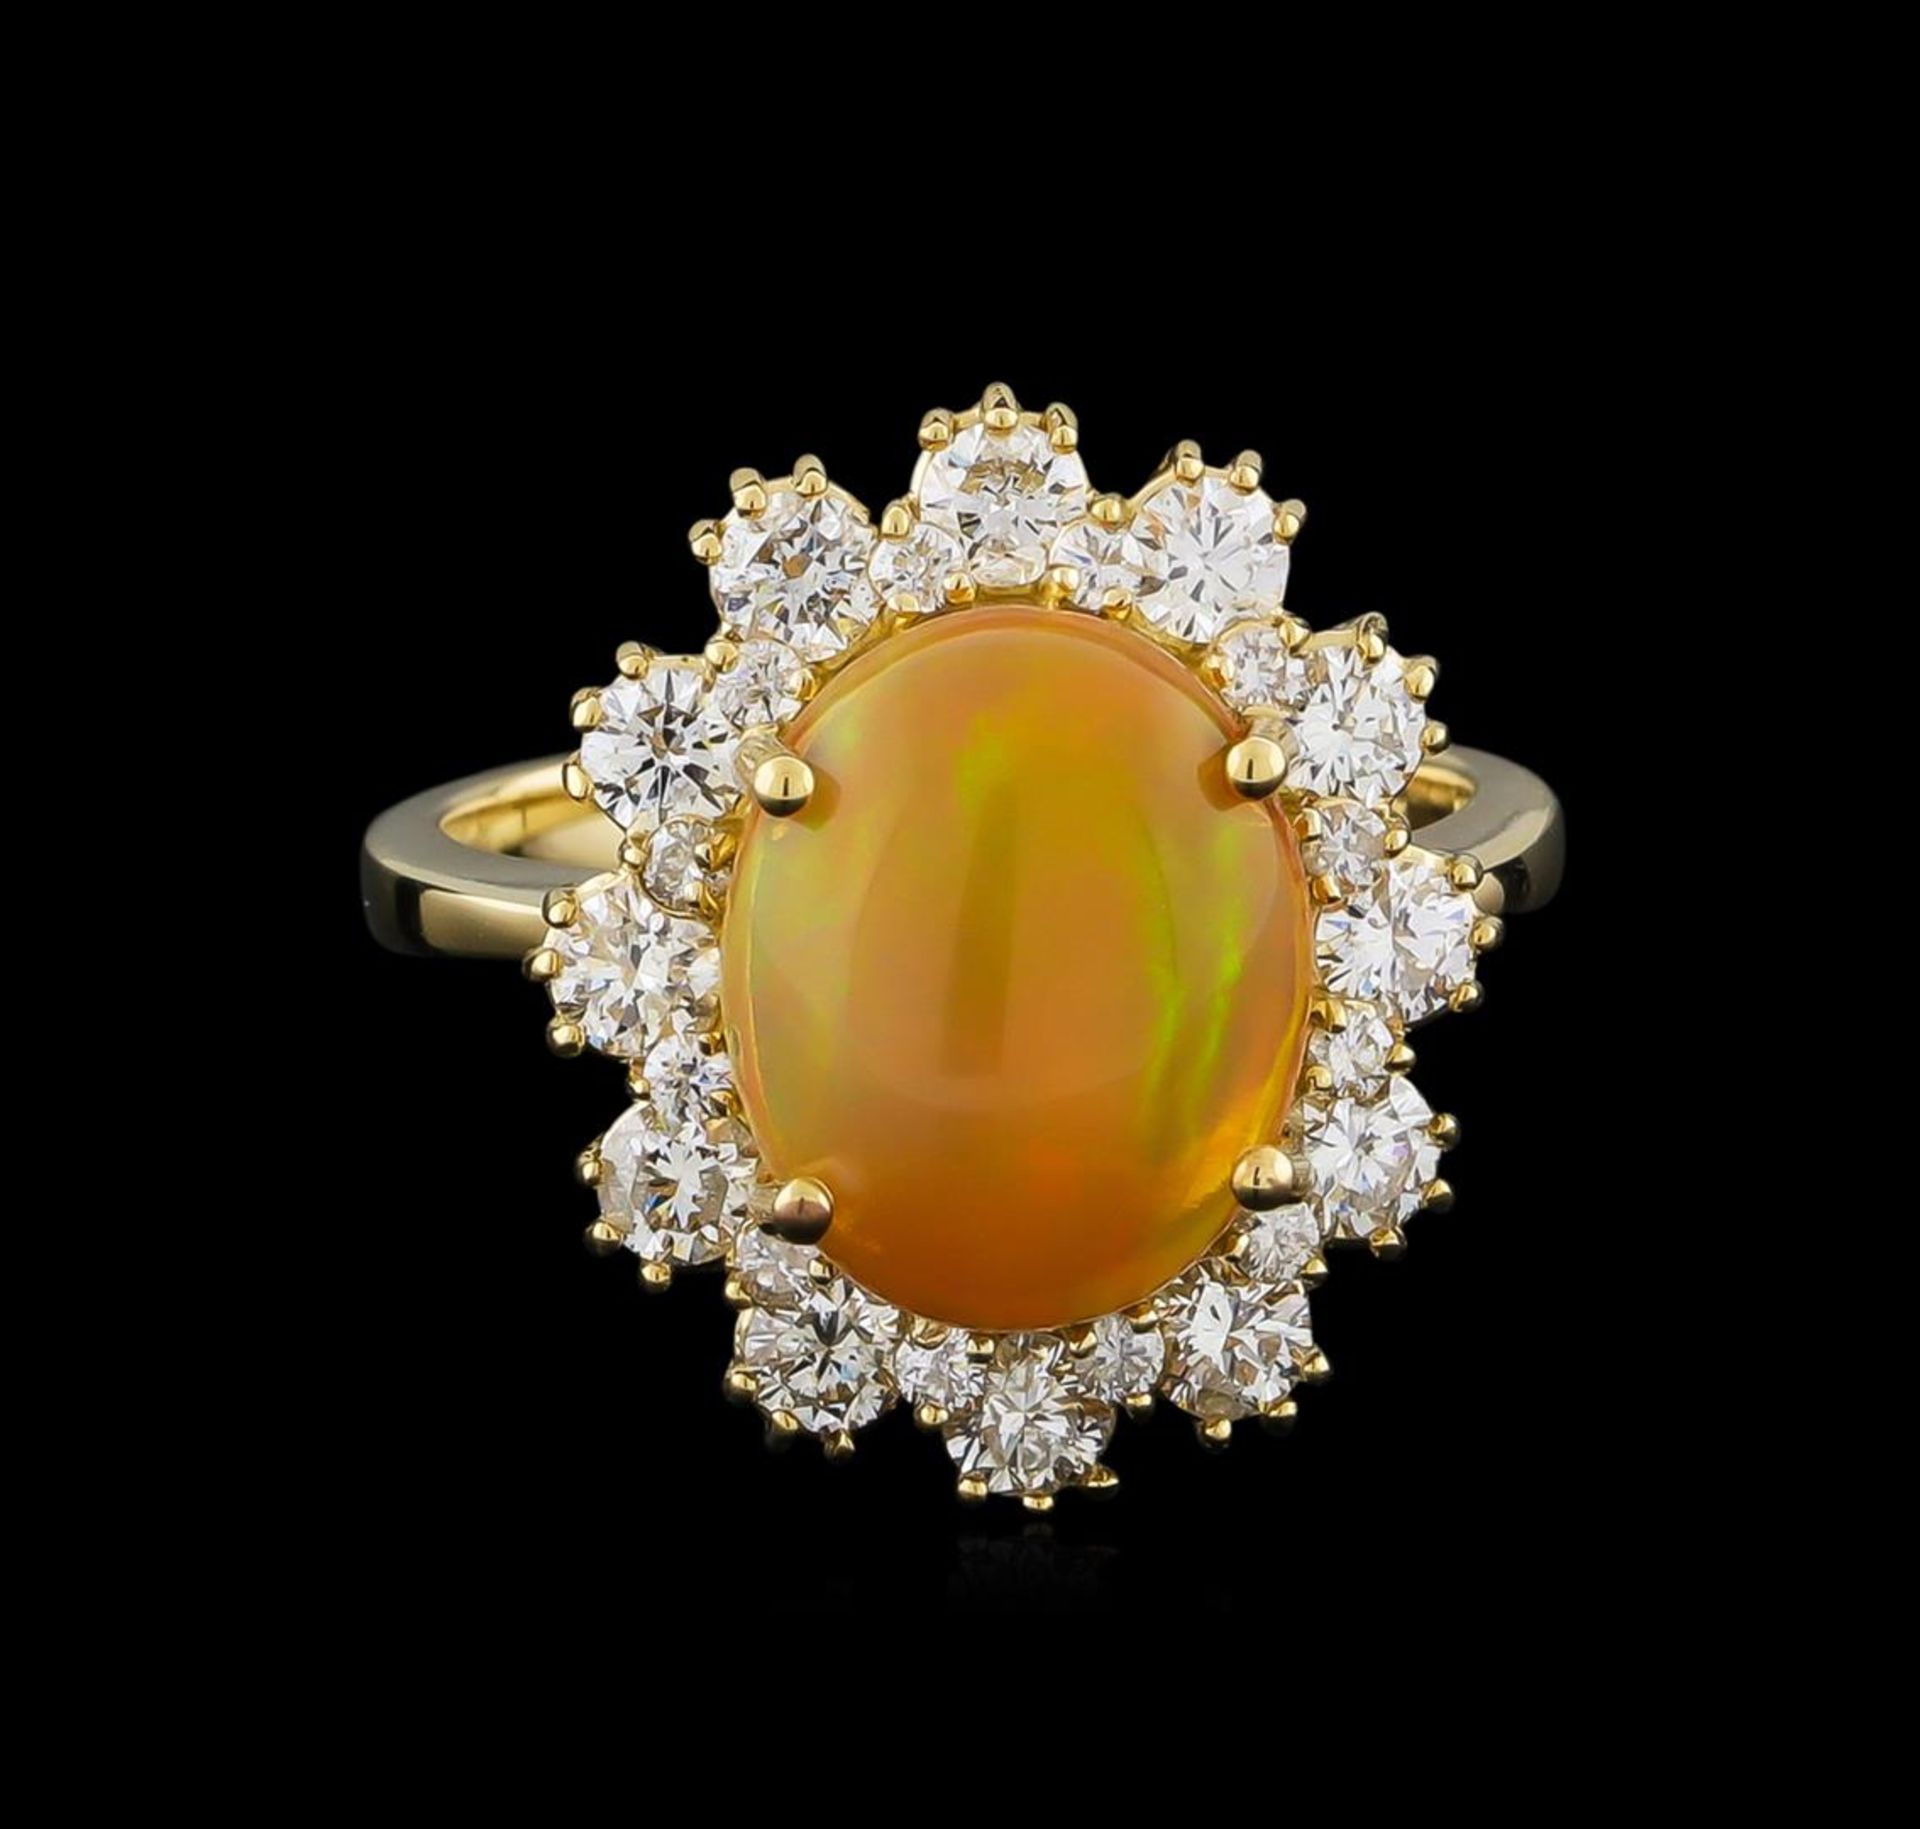 2.55 ctw Opal and Diamond Ring - 14KT Yellow Gold - Image 2 of 5